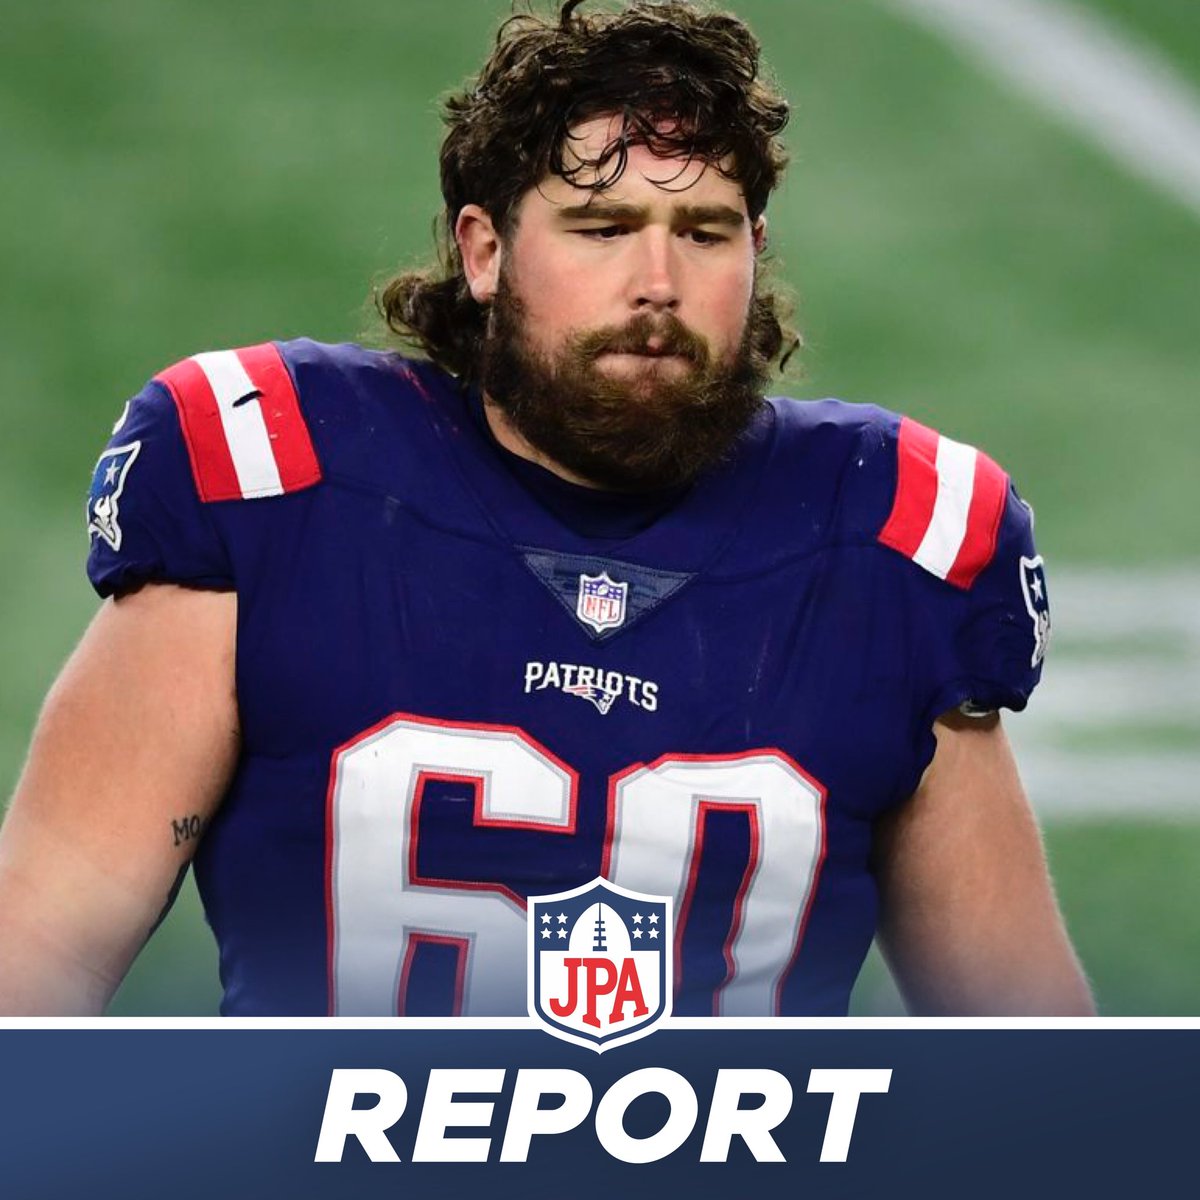 𝗥𝗘𝗣𝗢𝗥𝗧: The #Patriots and star C David Andrews have agreed to an extension through 2025, per @FieldYates